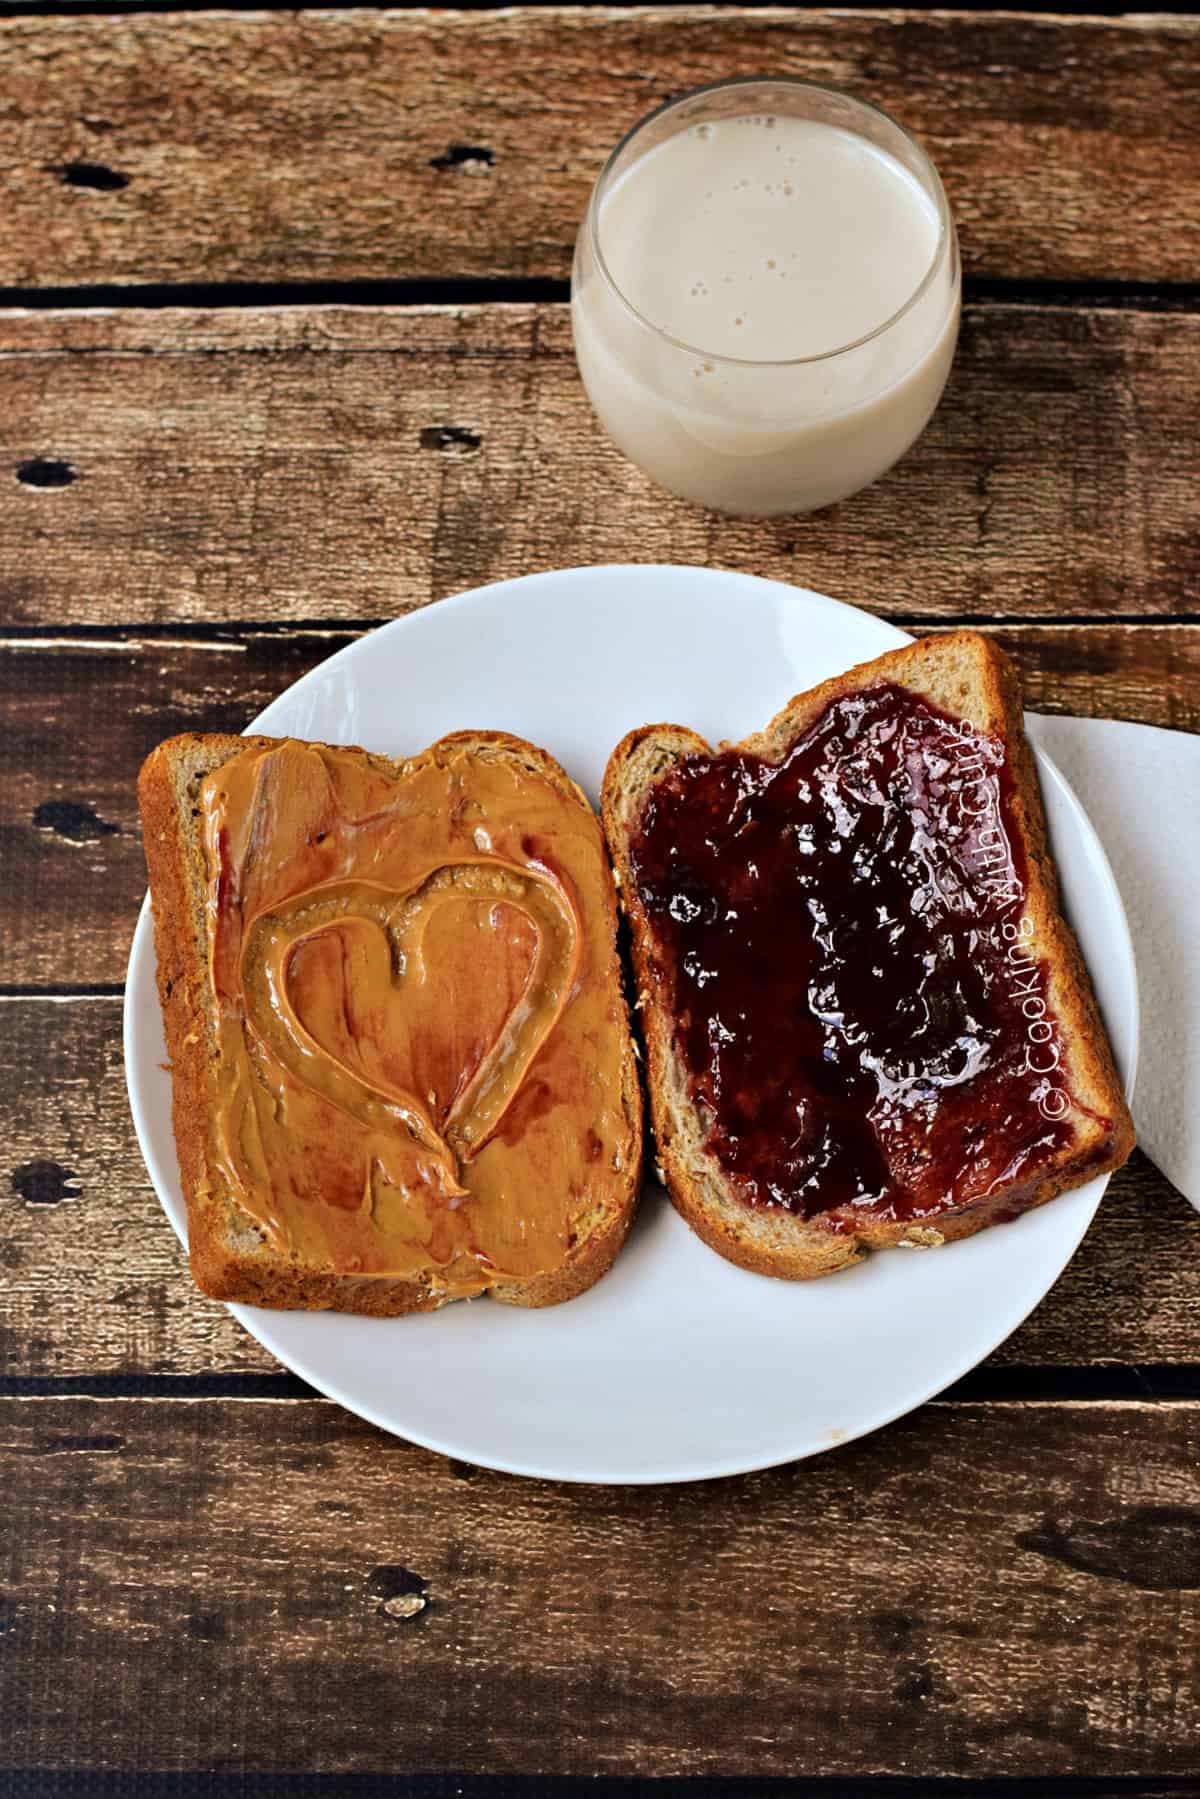 Looking down on a white plate with one slice of bread covered in peanut butter with a smear of jelly and a heart shape, and one slice of bread spread with jelly, with a glass of milk in the background.